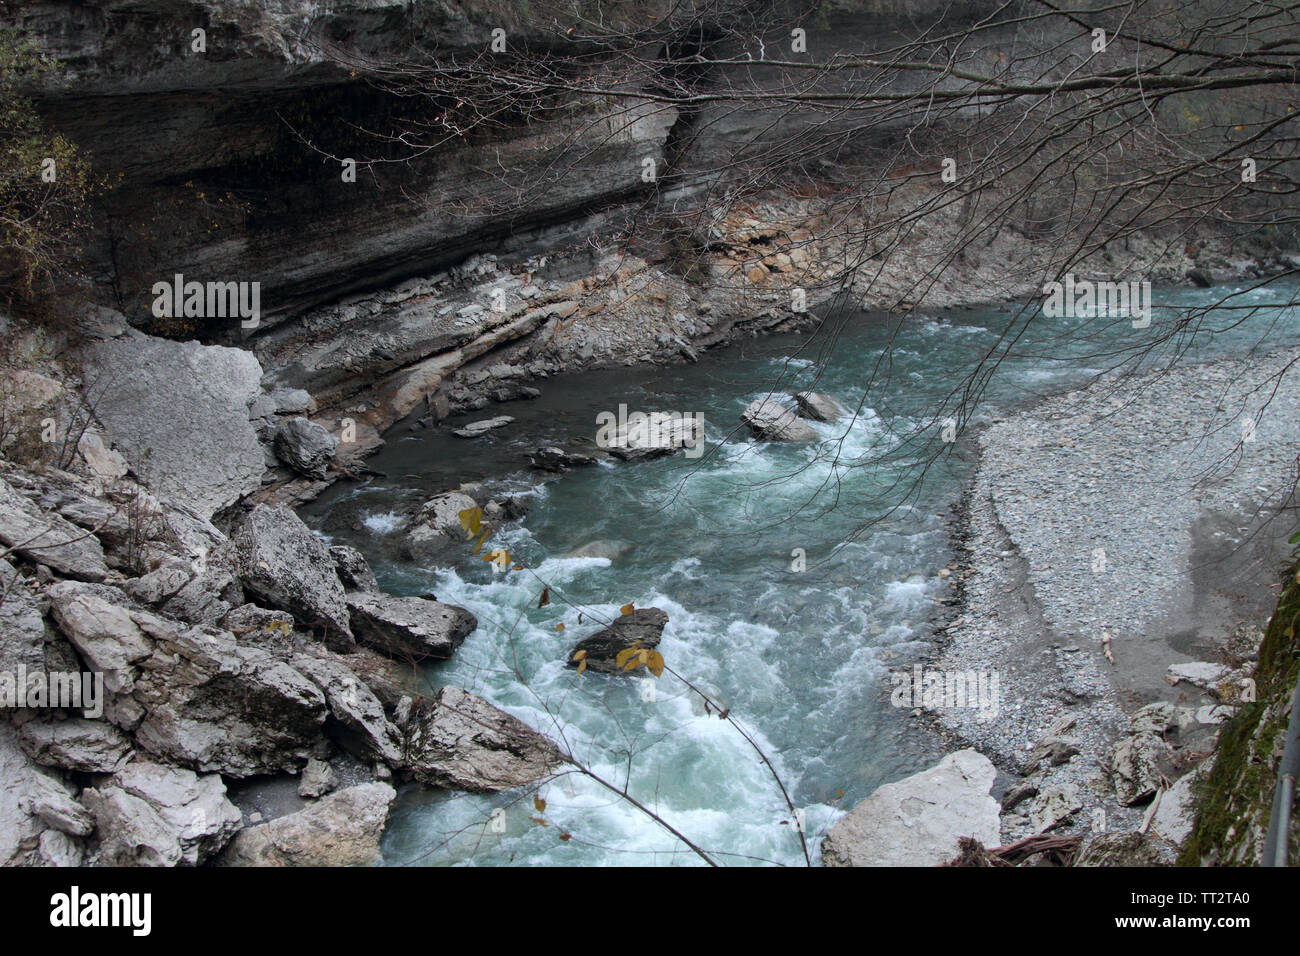 A stormy mountain river flows among the cliffs in the Khadzhokhskaya gorge. Stock Photo